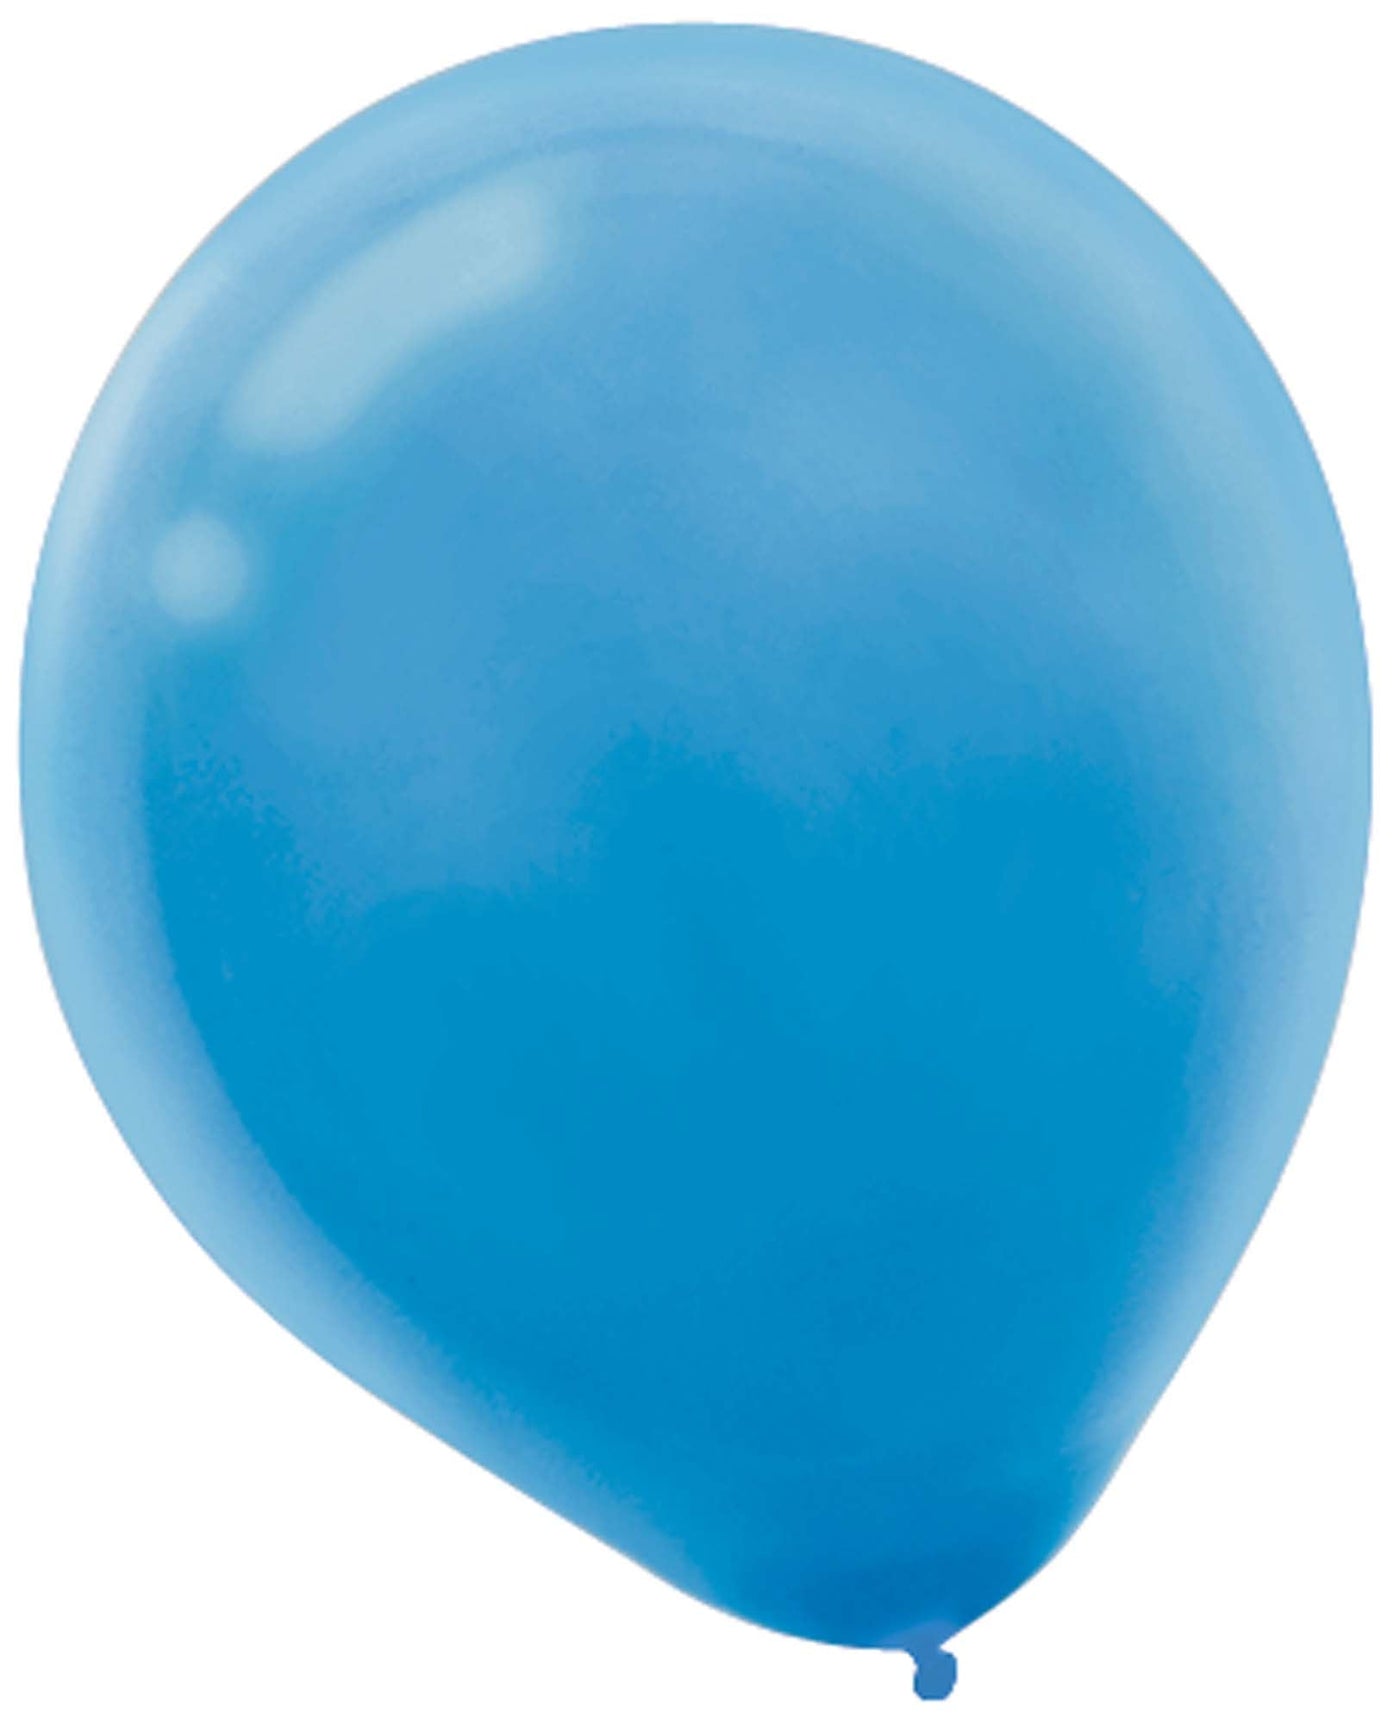 Powder Blue Latex Balloons 100ct - JJ's Party House